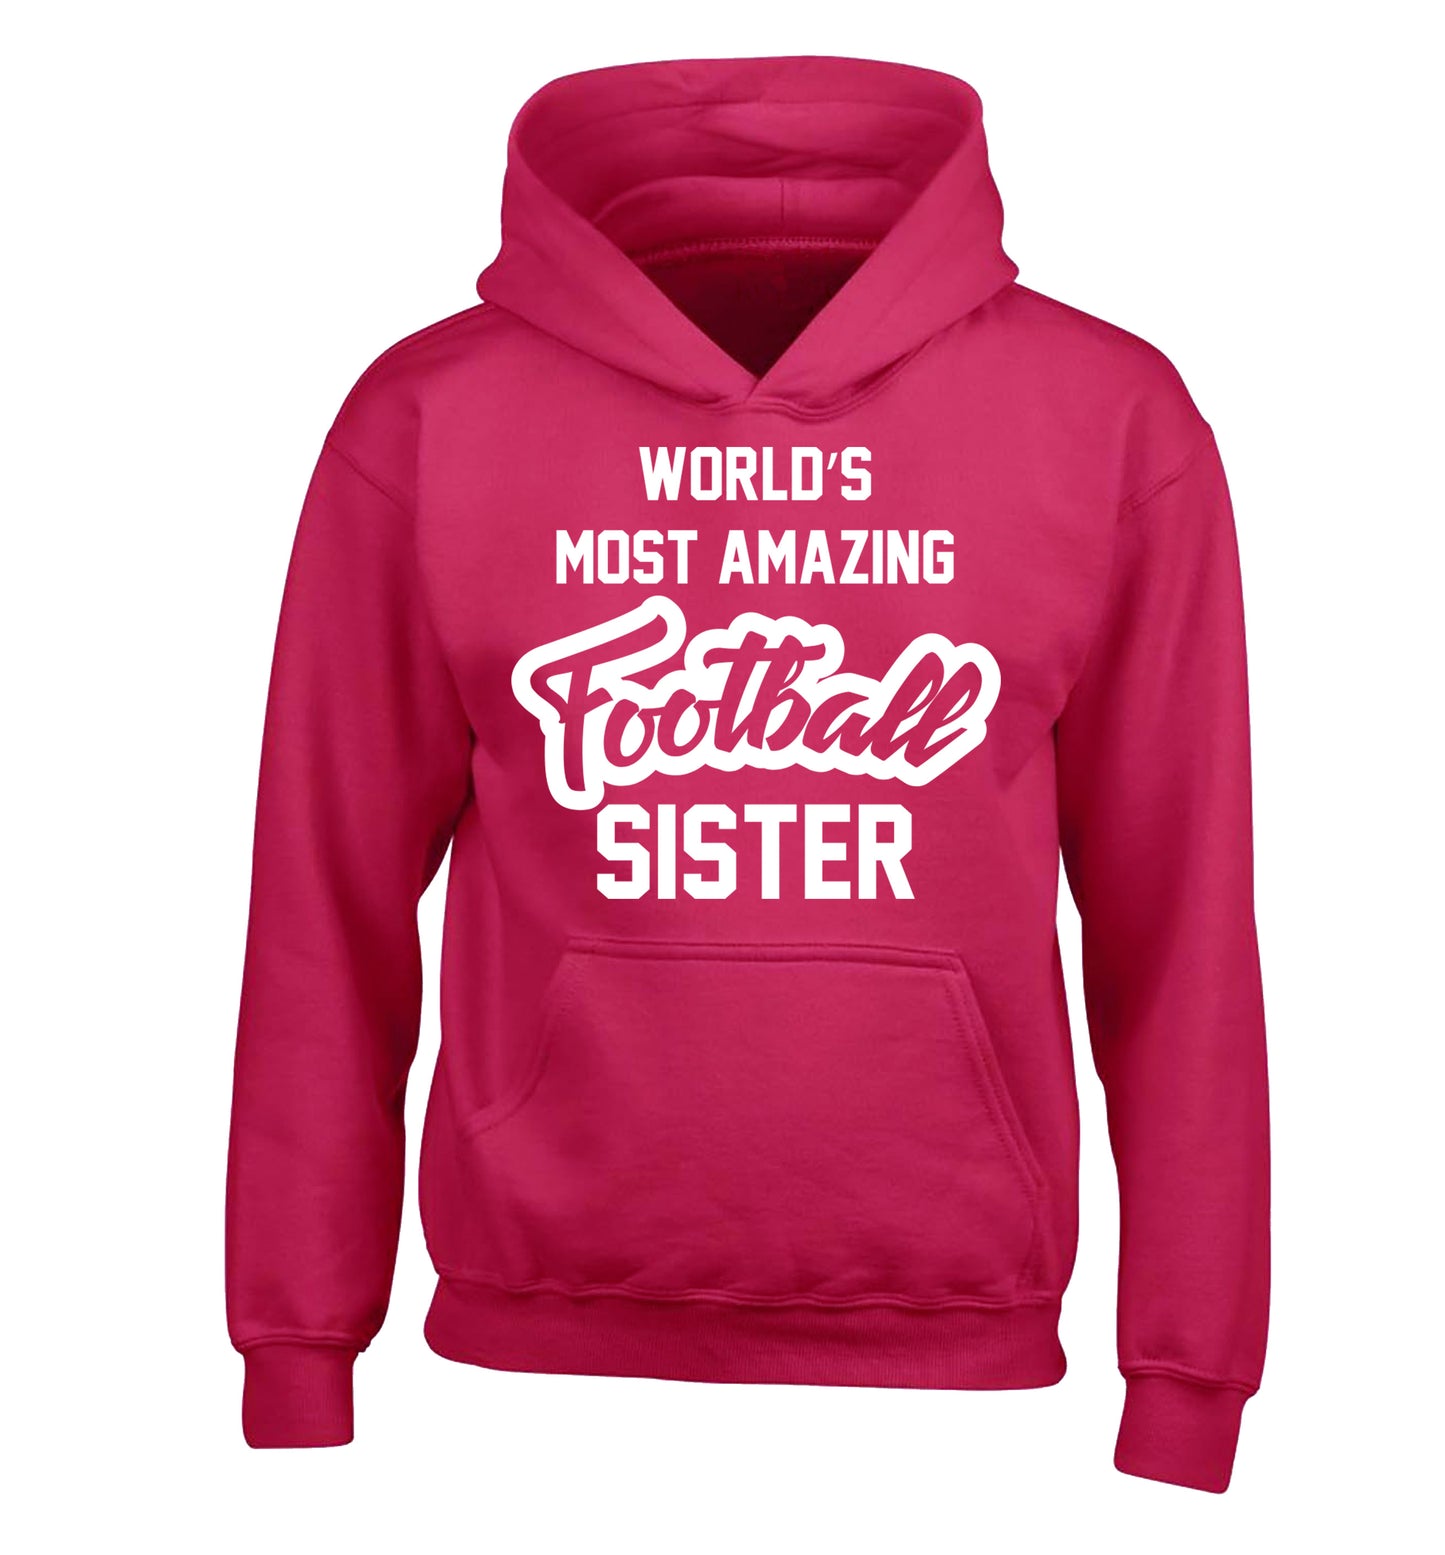 Worlds most amazing football sister children's pink hoodie 12-14 Years